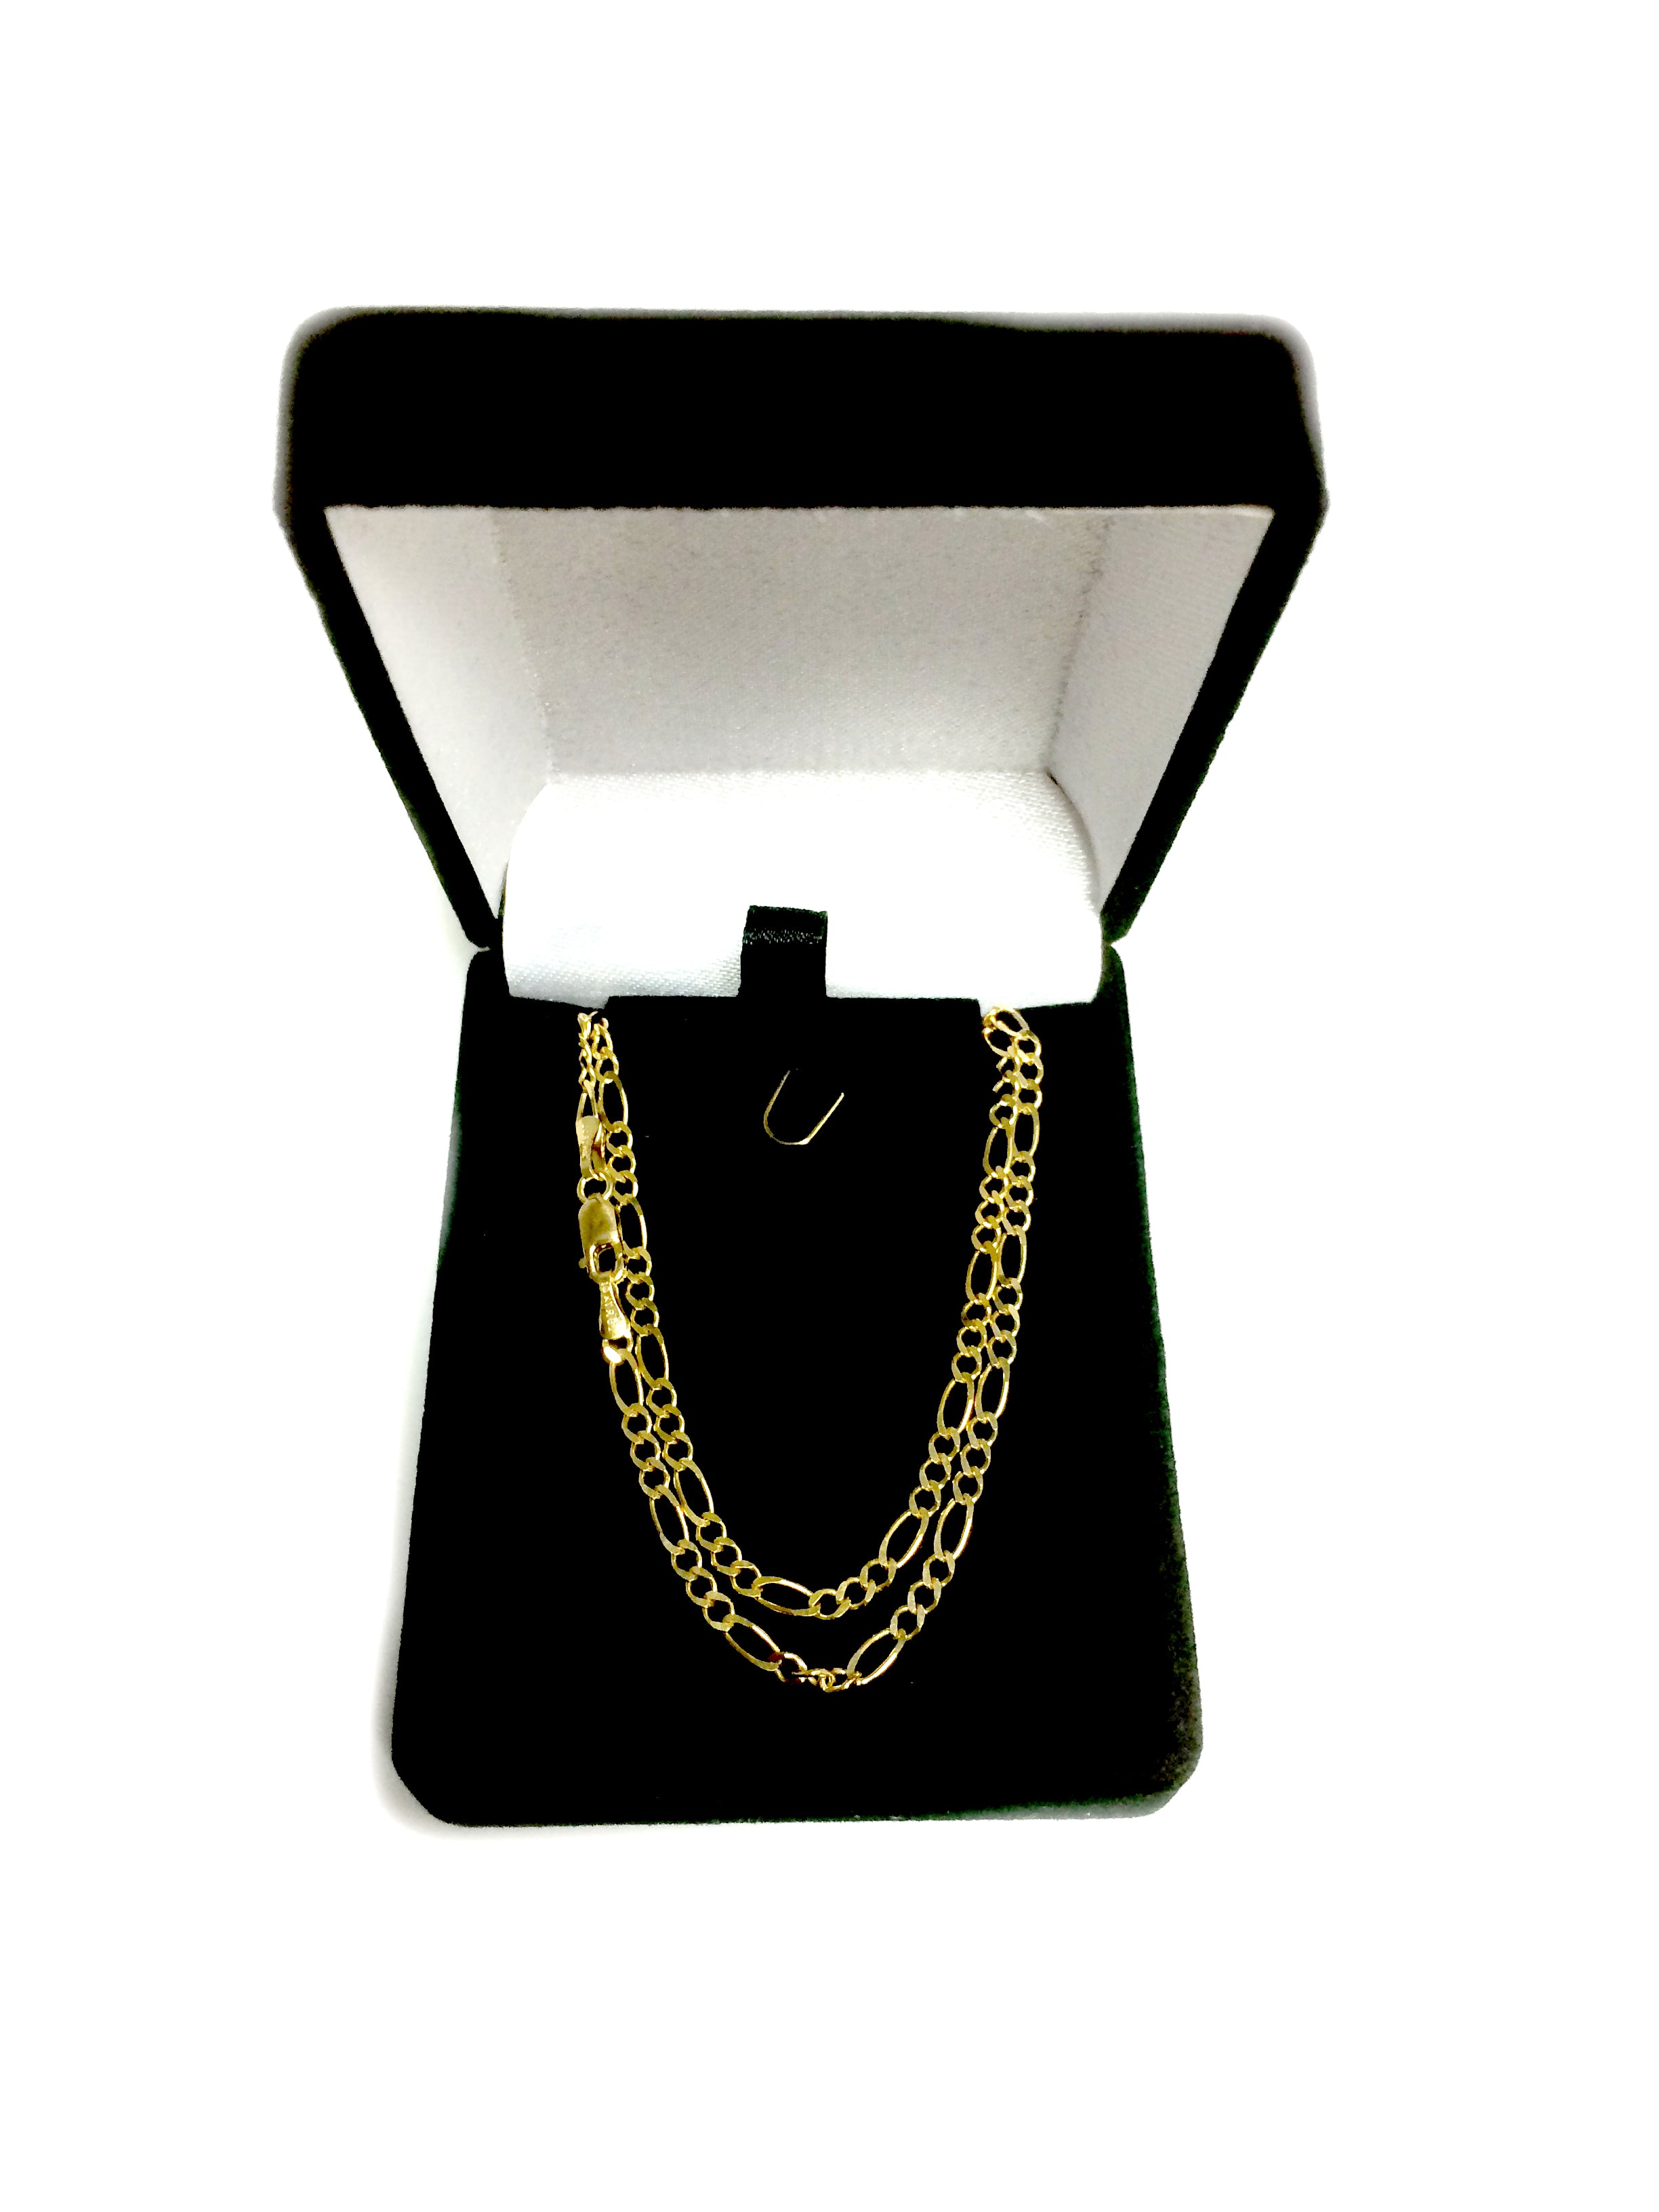 10k Yellow Solid Gold Figaro Chain Bracelet, 3.0mm, 7" fine designer jewelry for men and women